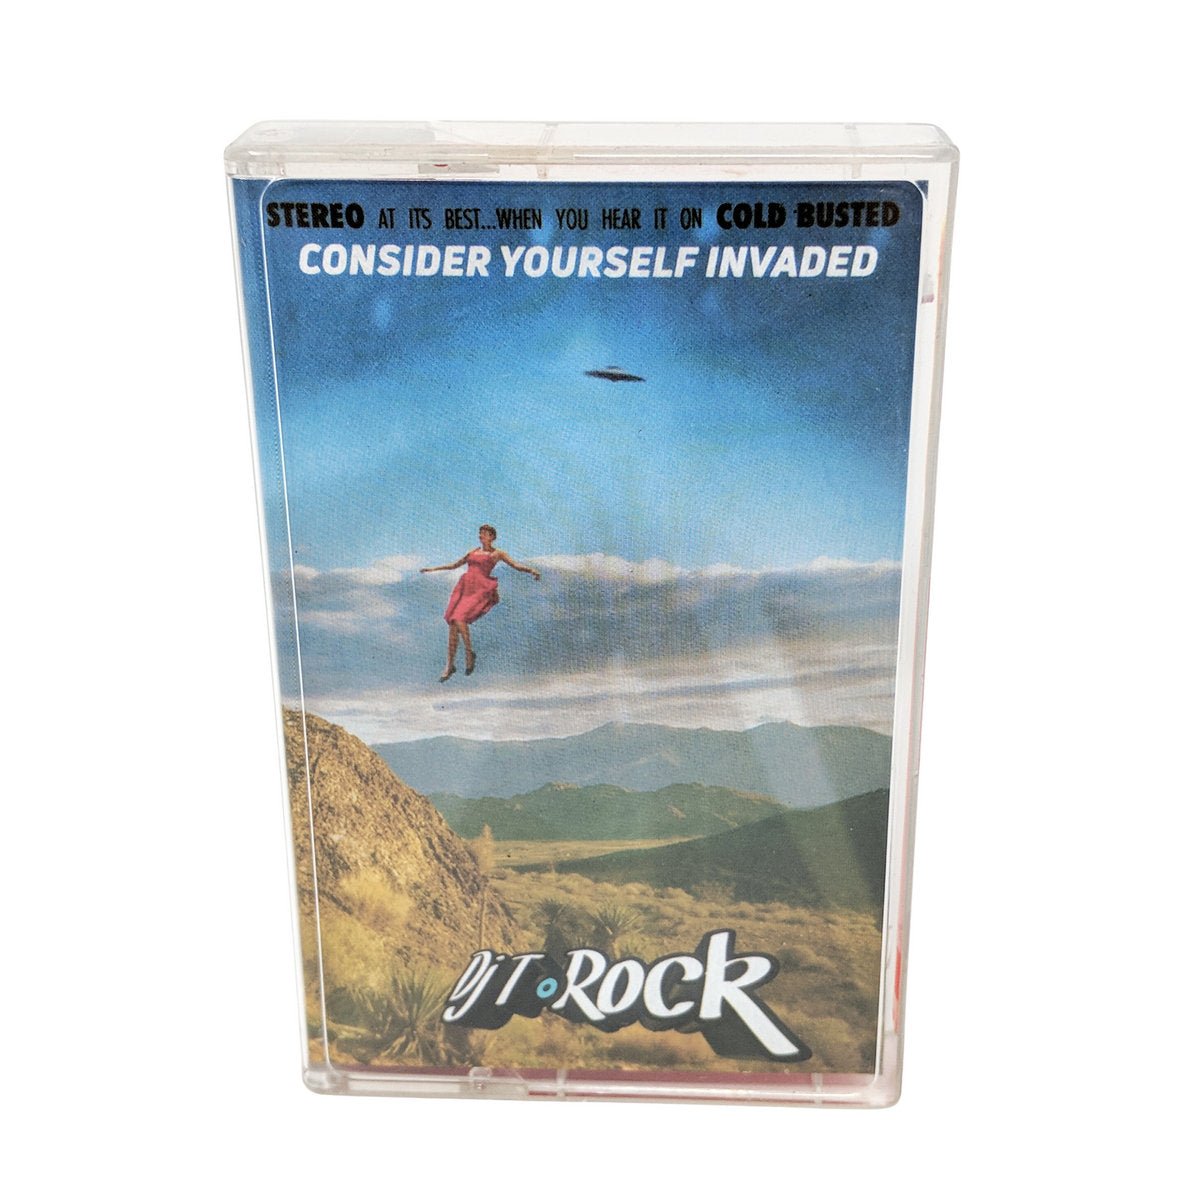 DJ T-Rock - Consider Yourself Invaded - Limited Edition Cassette - Cold Busted